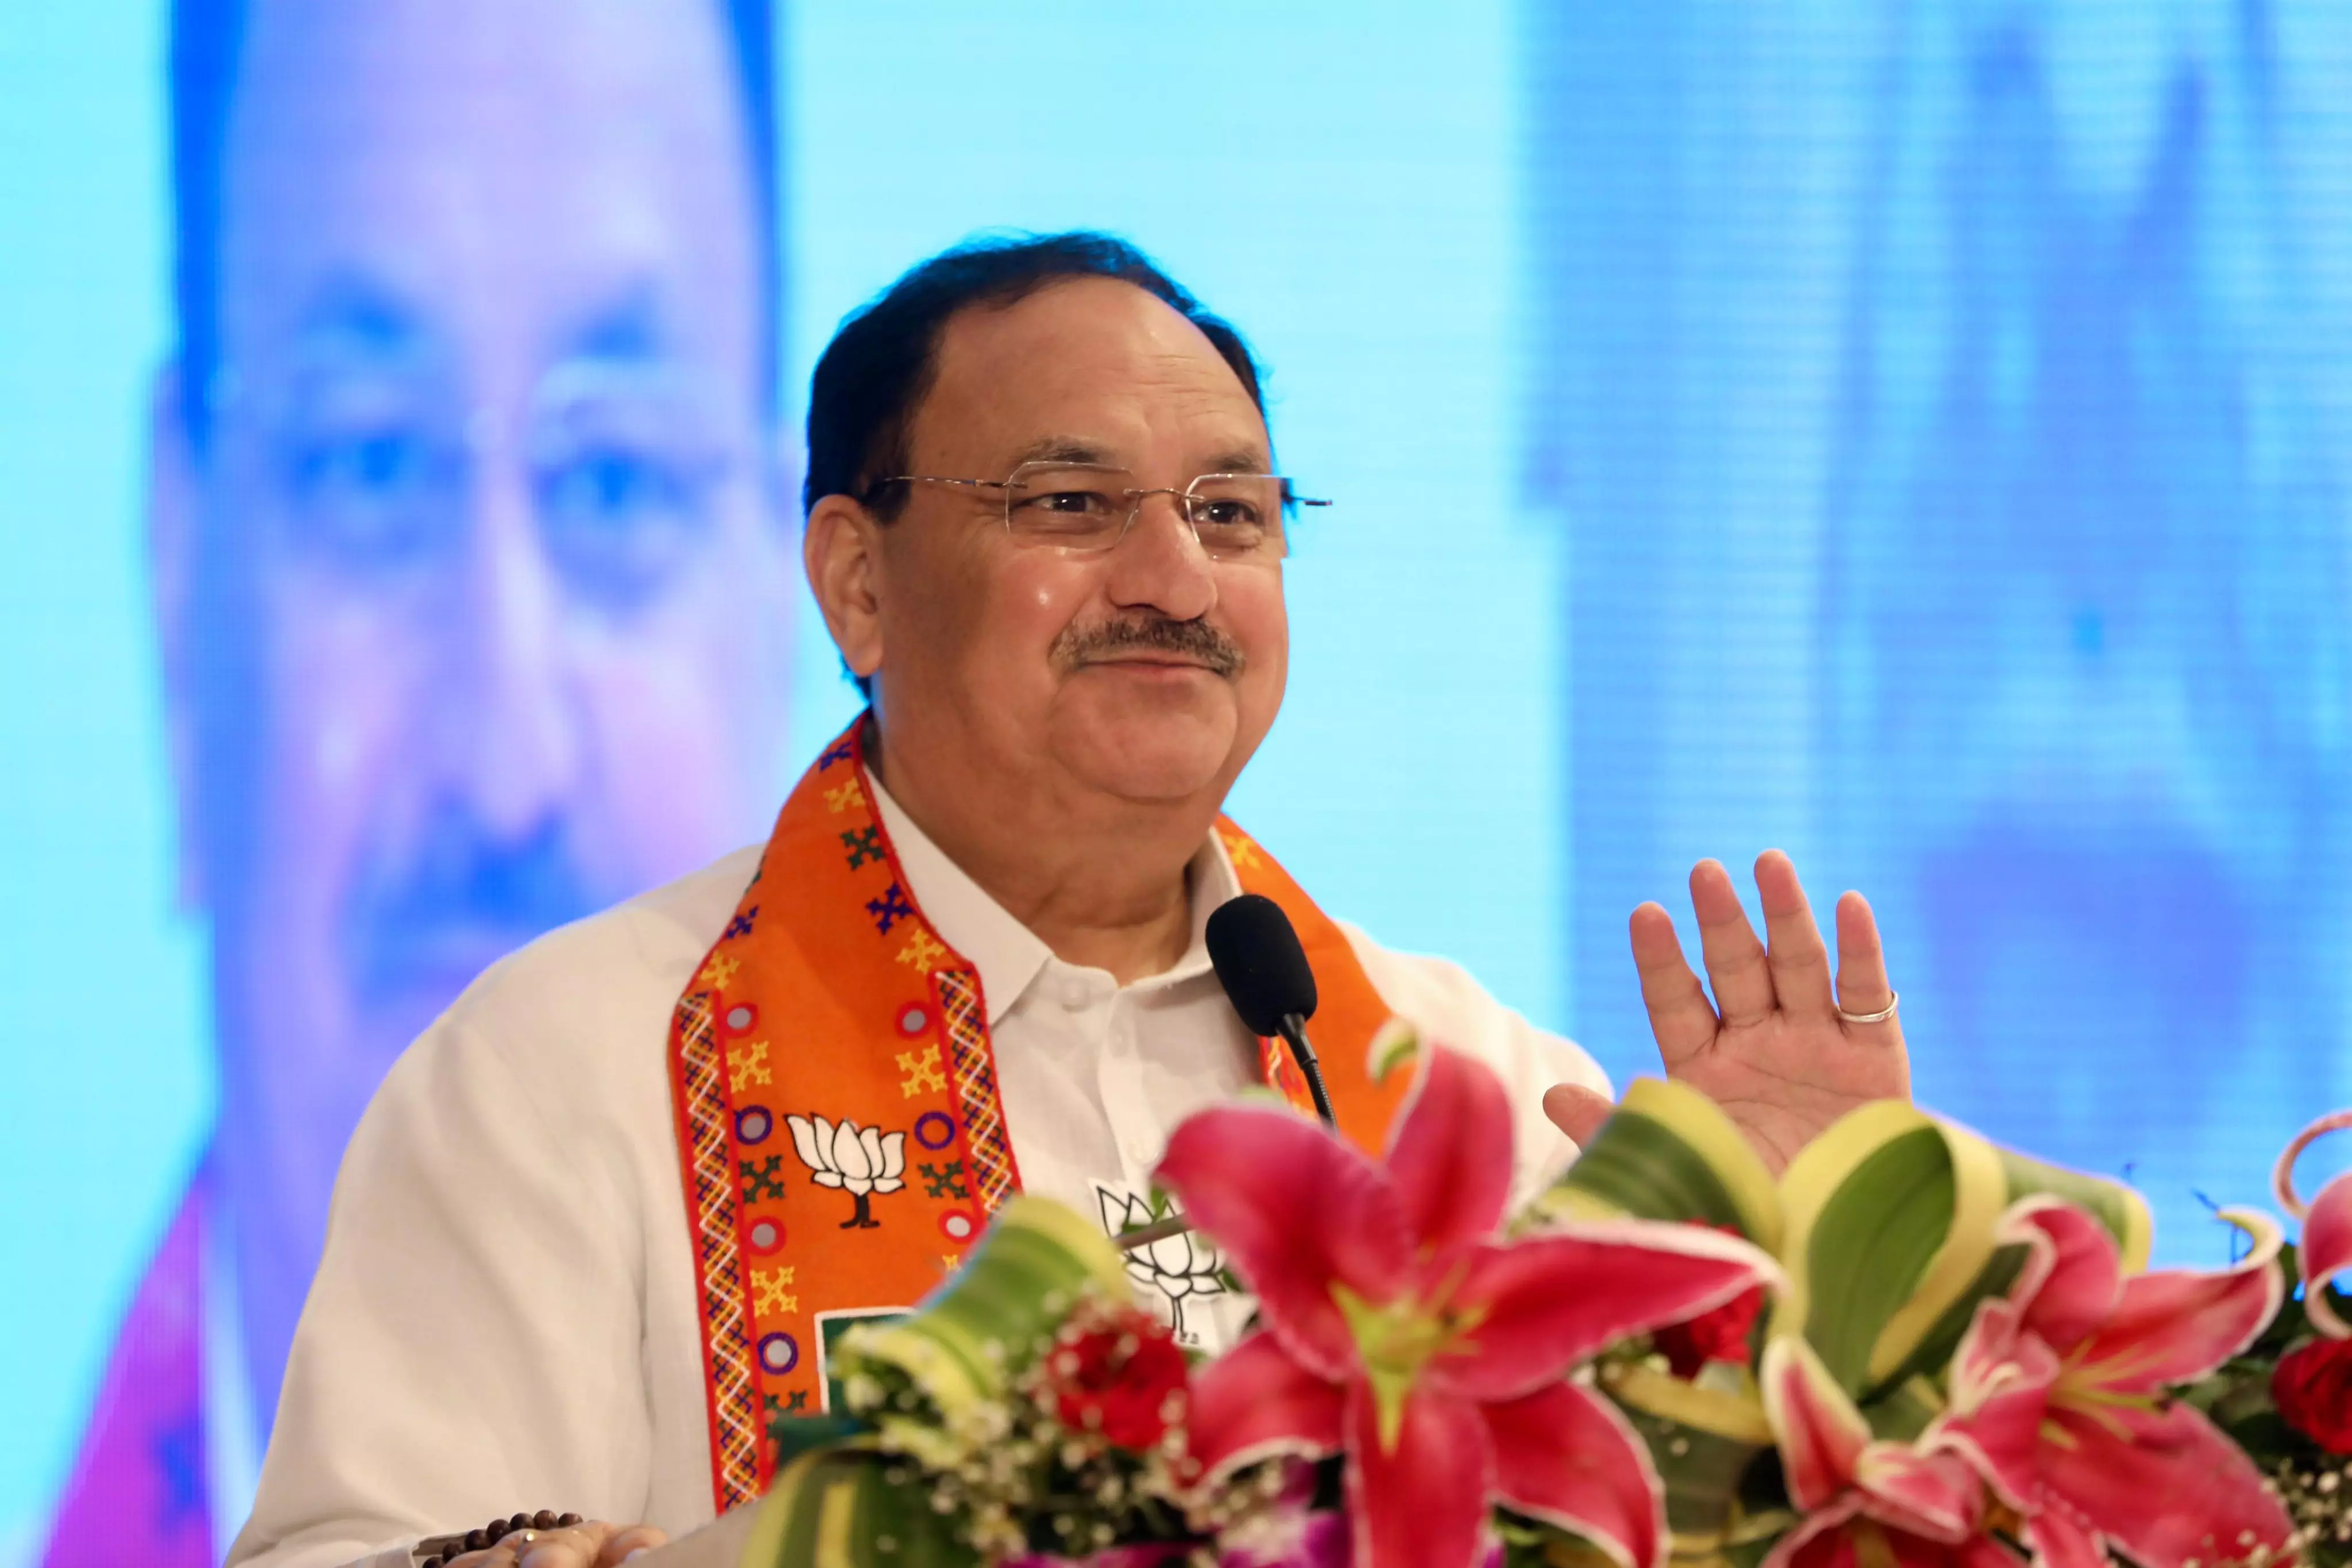 For BJP, Ram is not for politicisation for seeking votes, but matter of faith: Nadda